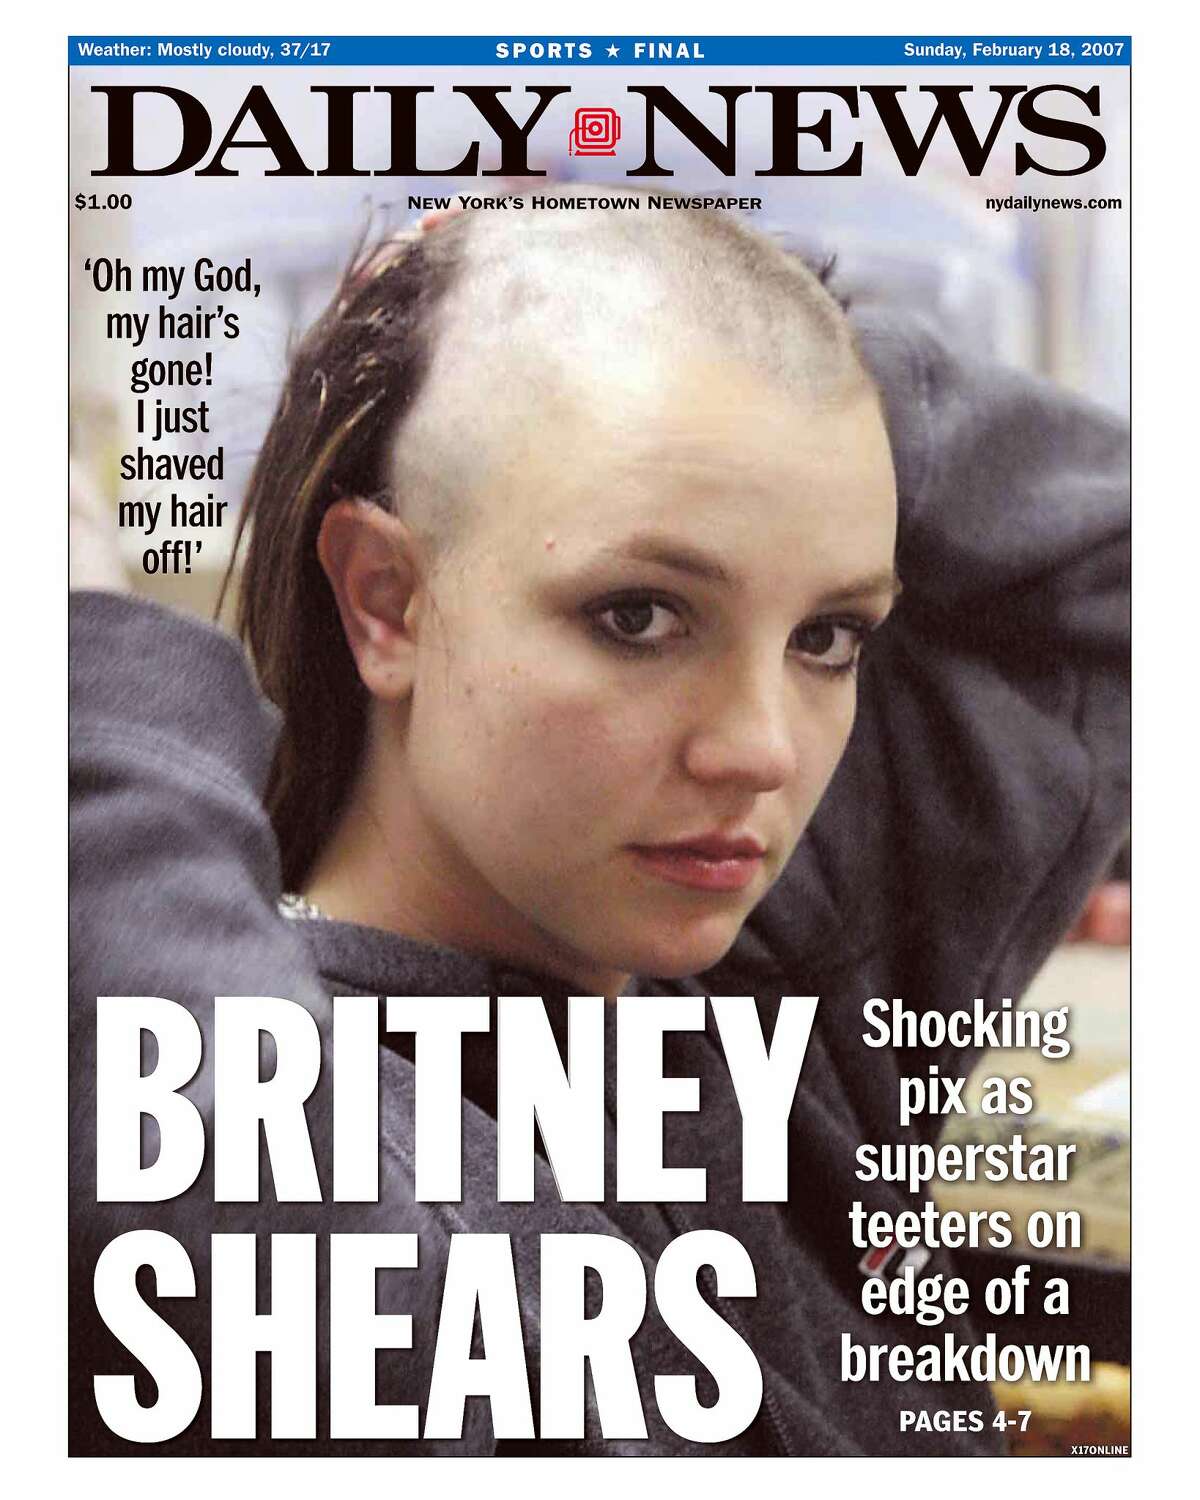 Daily News front page February 18, 2007, Headline: BRITNEY SHEARS, Shocking pix as superstar teeters on edge of a breakdown, 'Oh my God, my hair's gone! I just shaved my hair off!', Britney Spears.